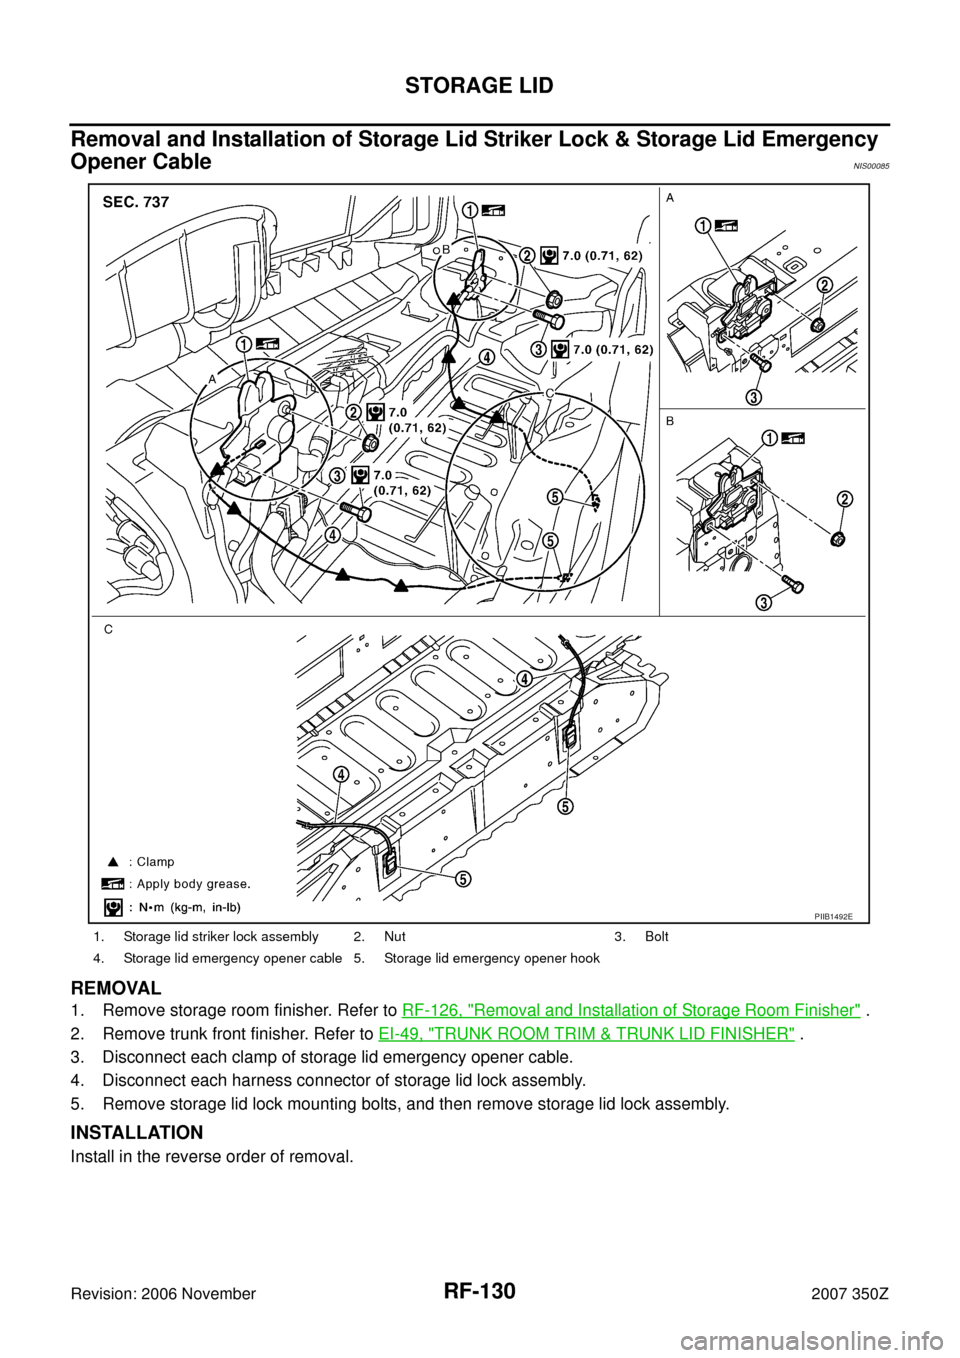 NISSAN 350Z 2007 Z33 Roof Workshop Manual RF-130
STORAGE LID
Revision: 2006 November2007 350Z
Removal and Installation of Storage Lid Striker Lock & Storage Lid Emergency 
Opener Cable
NIS00085
REMOVAL
1. Remove storage room finisher. Refer t